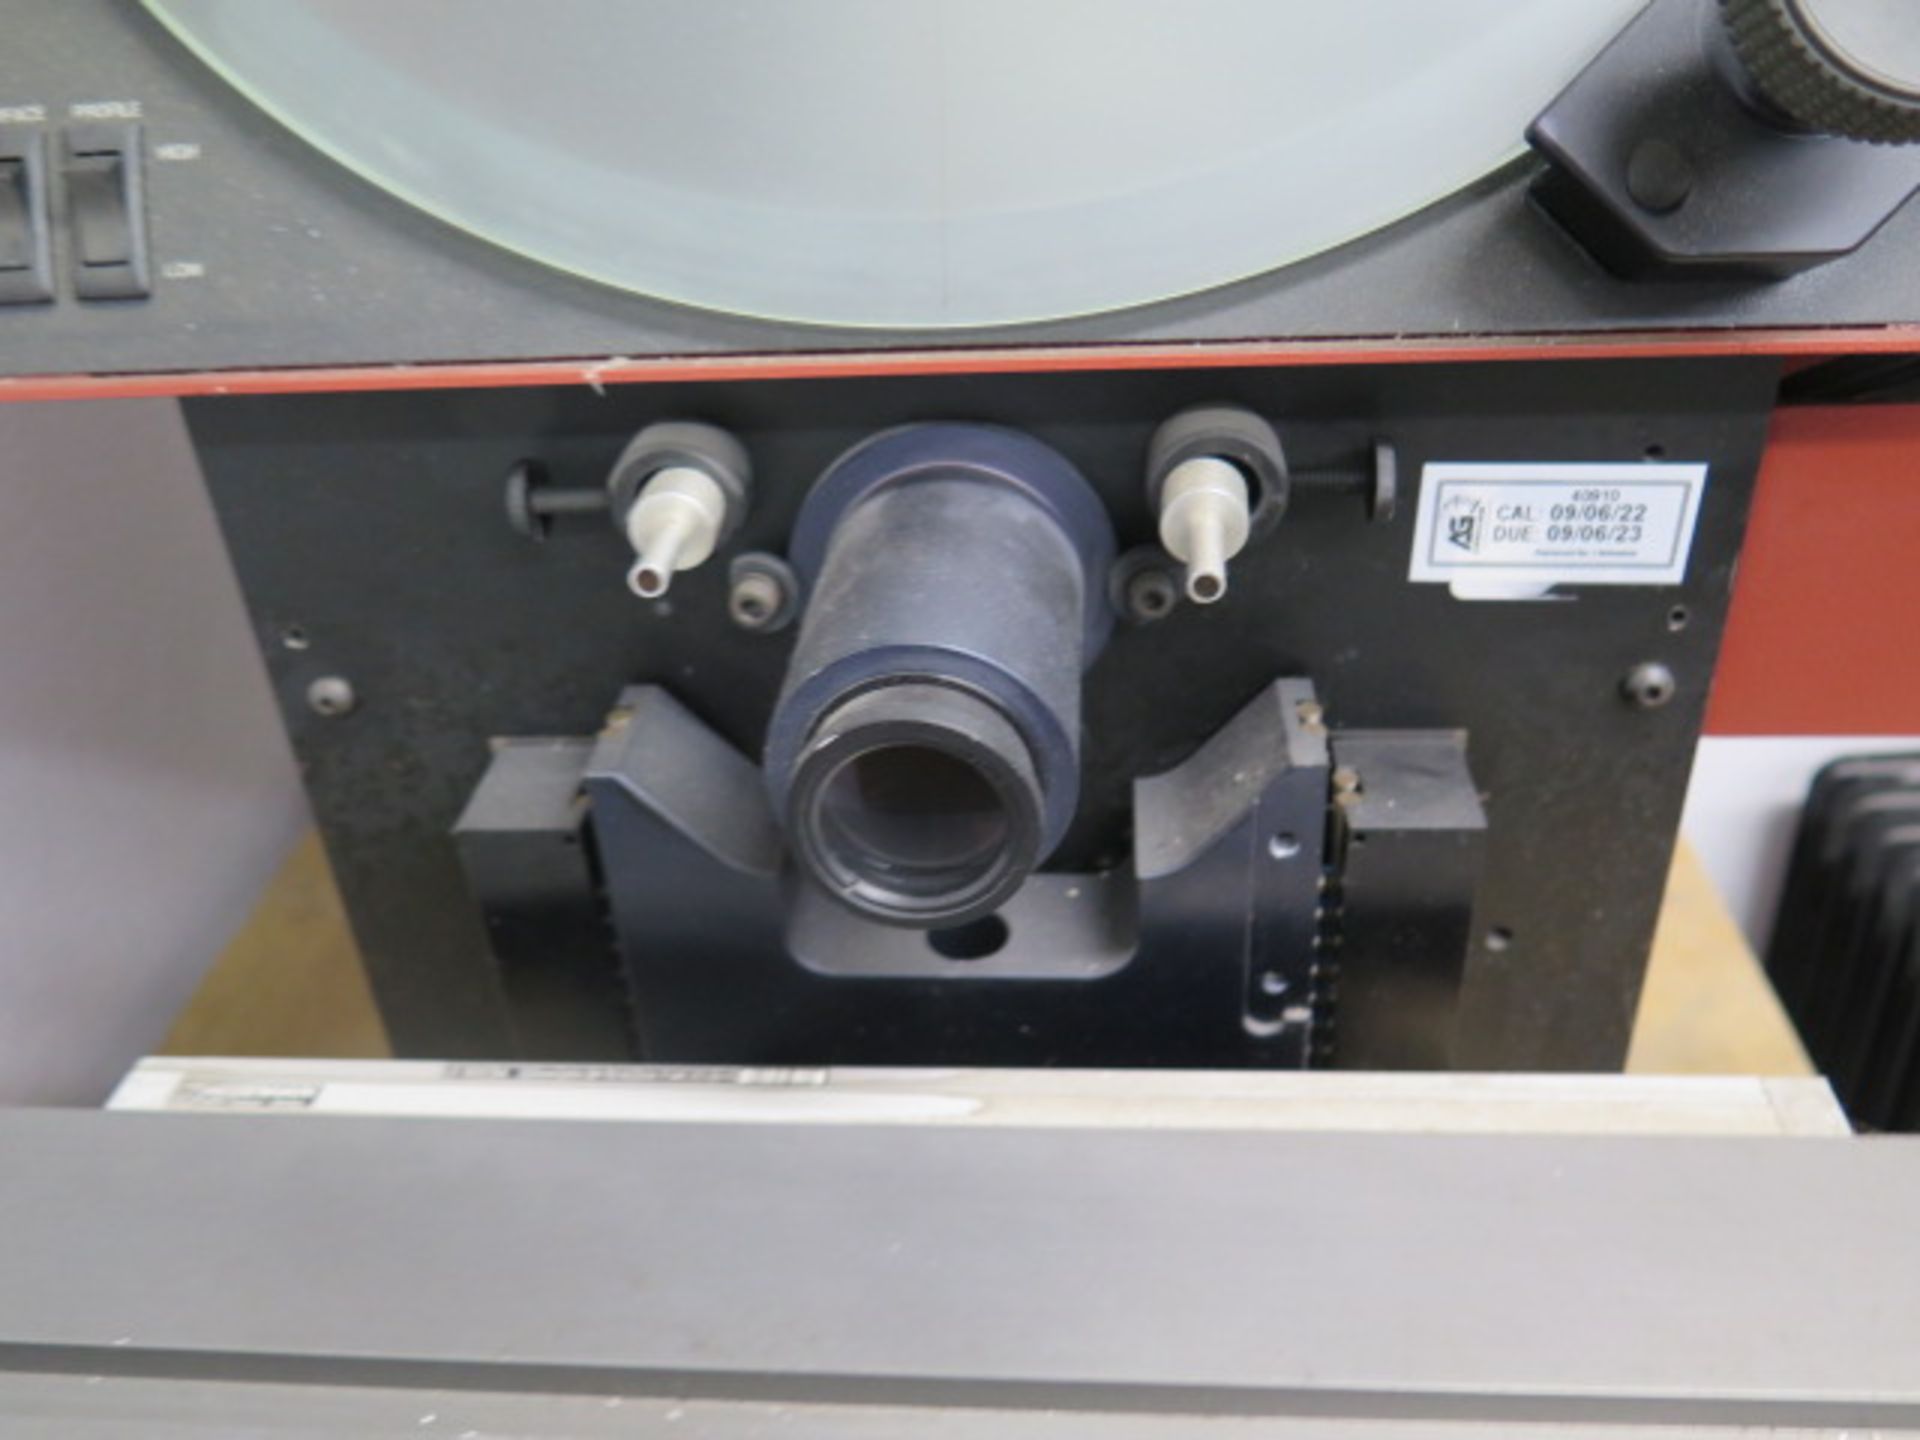 Starrett HE350 14” Optical Comparator s/n 40910 w/ Quadra-Chek 200 Programmable DRO, SOLD AS IS - Image 5 of 9